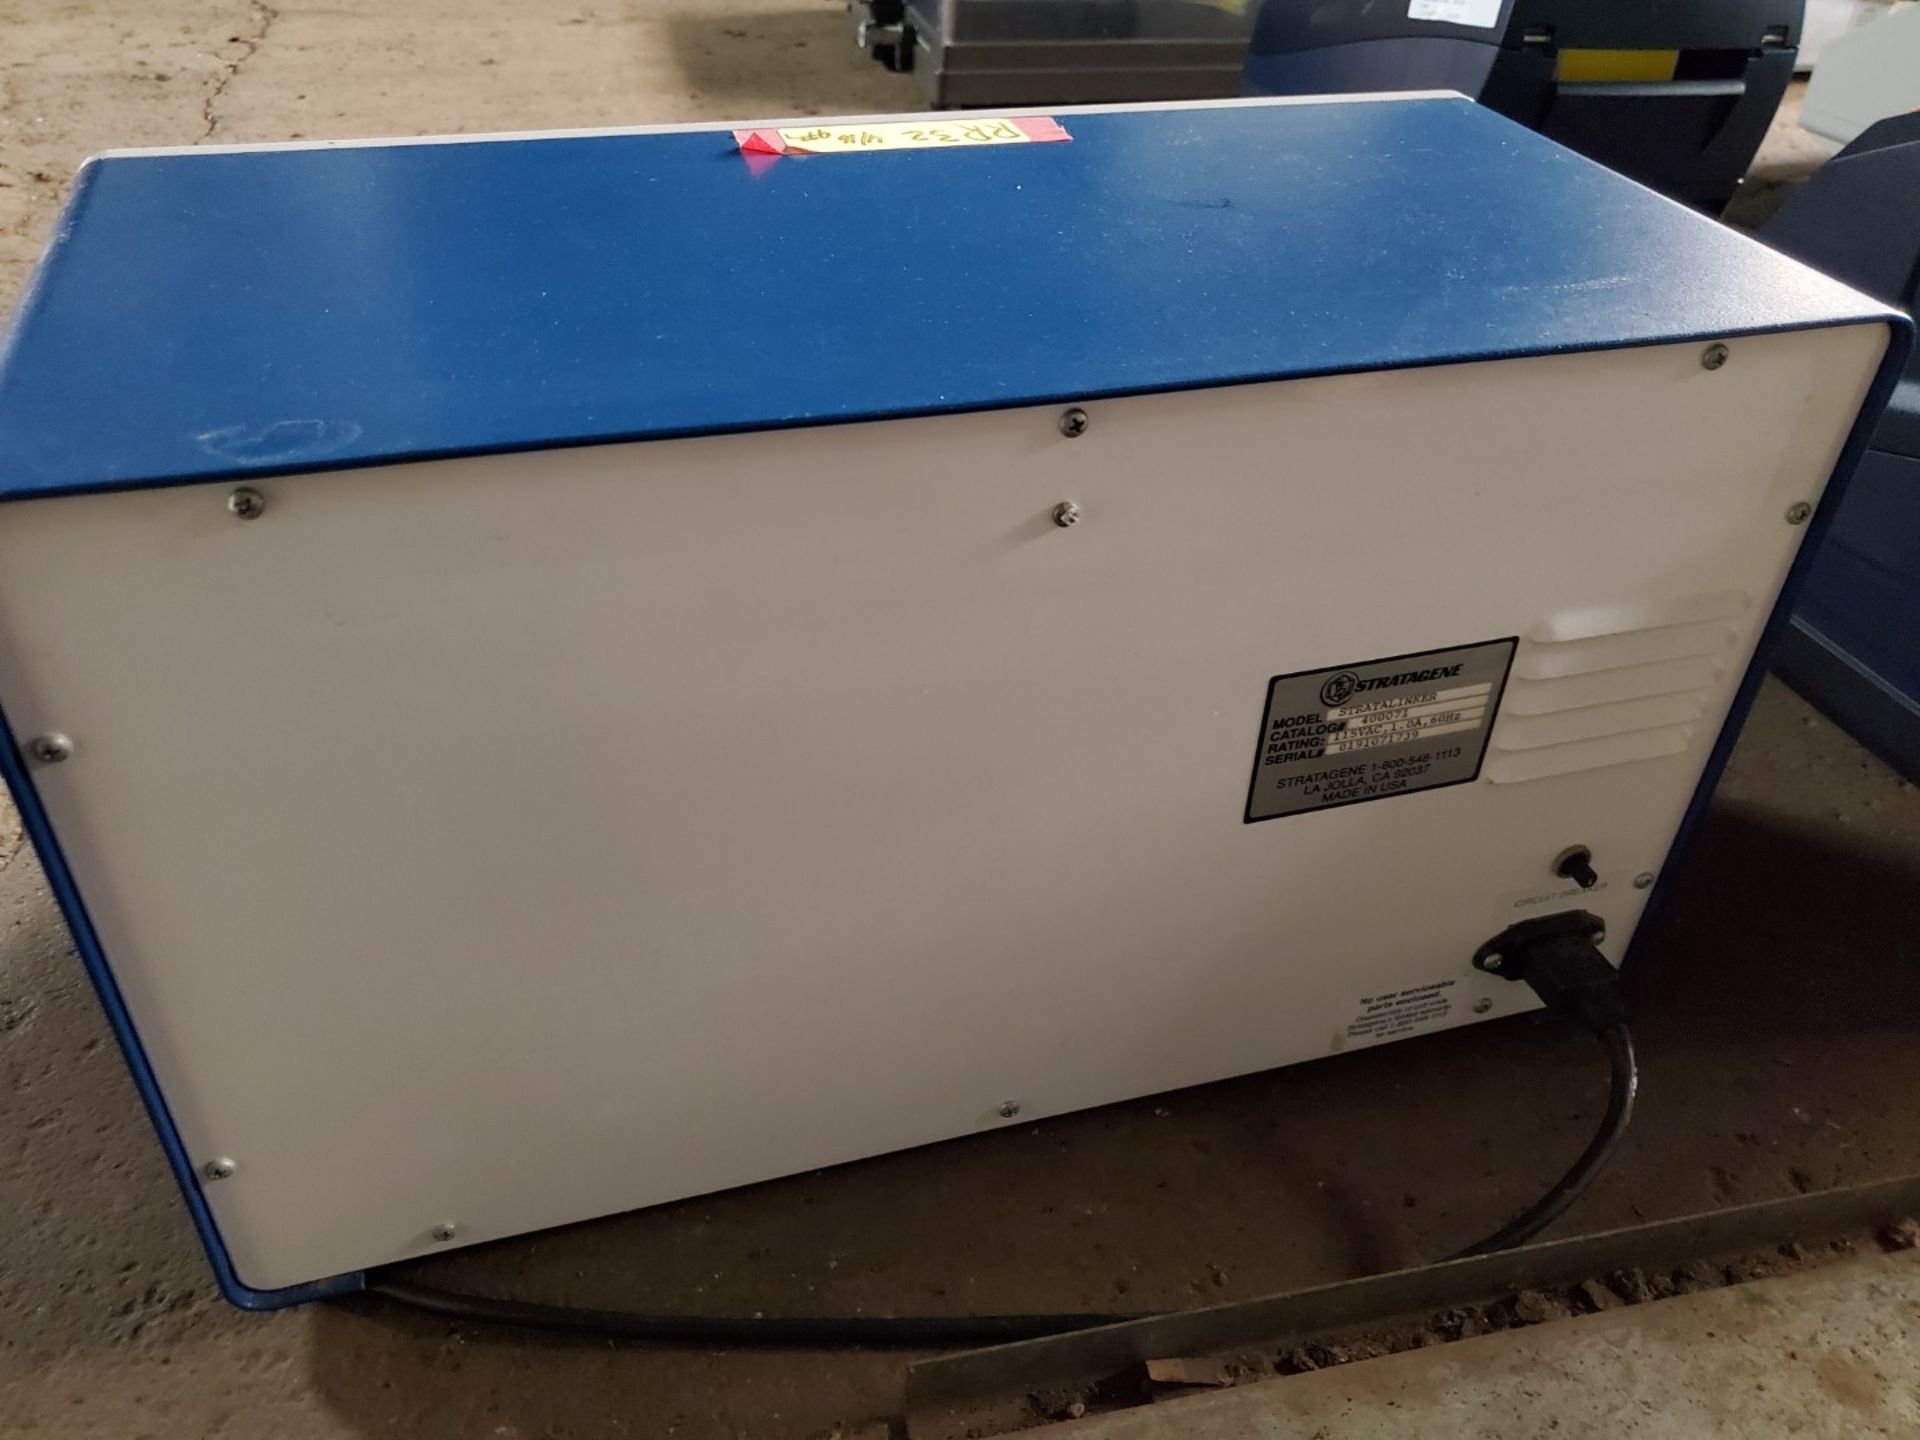 Stratagene UV Stratalinker 1800, with controls, 115 volts - Image 2 of 4